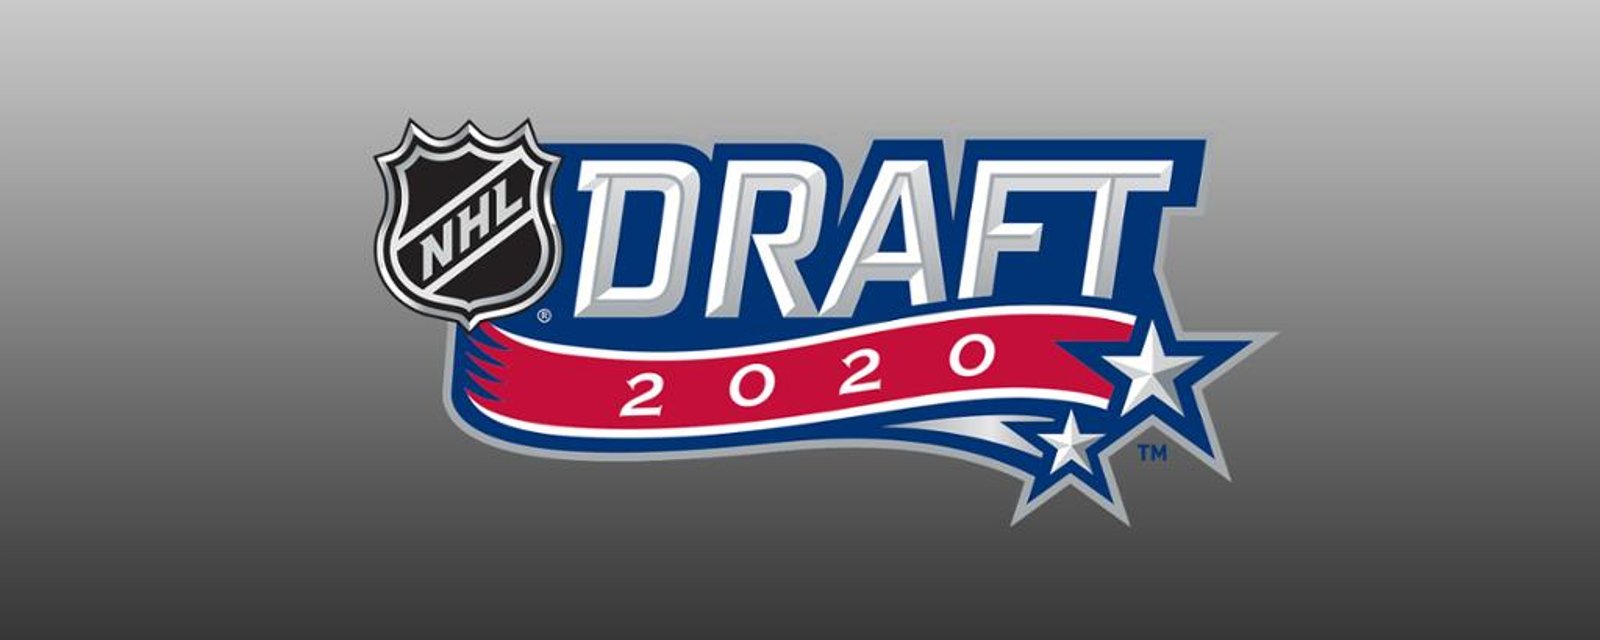 Full 2020 NHL Draft order revealed and teams face changes! 